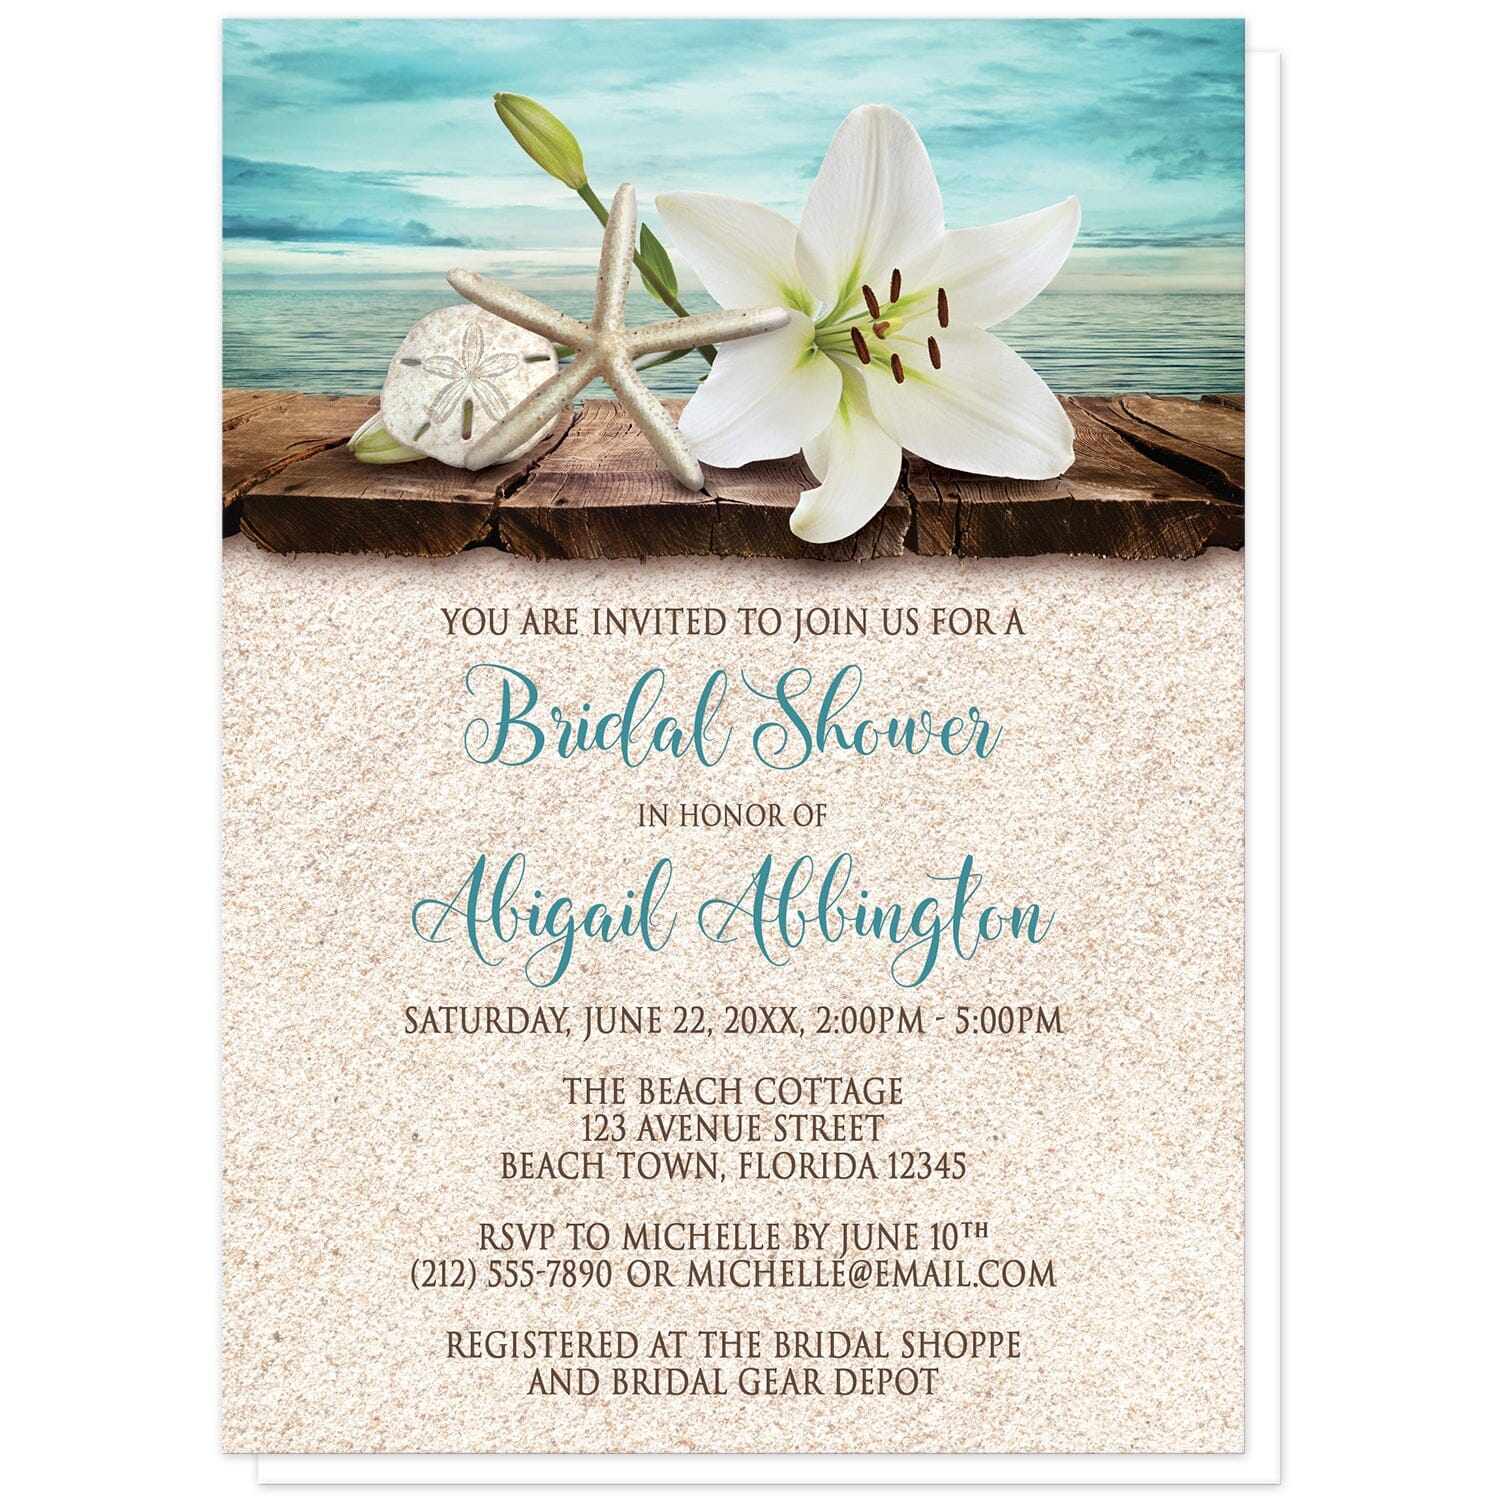 Lily Seashells and Sand Beach Bridal Shower Invitations at Artistically Invited. Floral lily seashells and sand beach bridal shower invitations with an elegant white lily, a starfish, and a sand dollar on a rustic wood dock overlooking the open water. Your personalized bridal shower celebration details are custom printed in dark brown and teal over a beige sand background design.